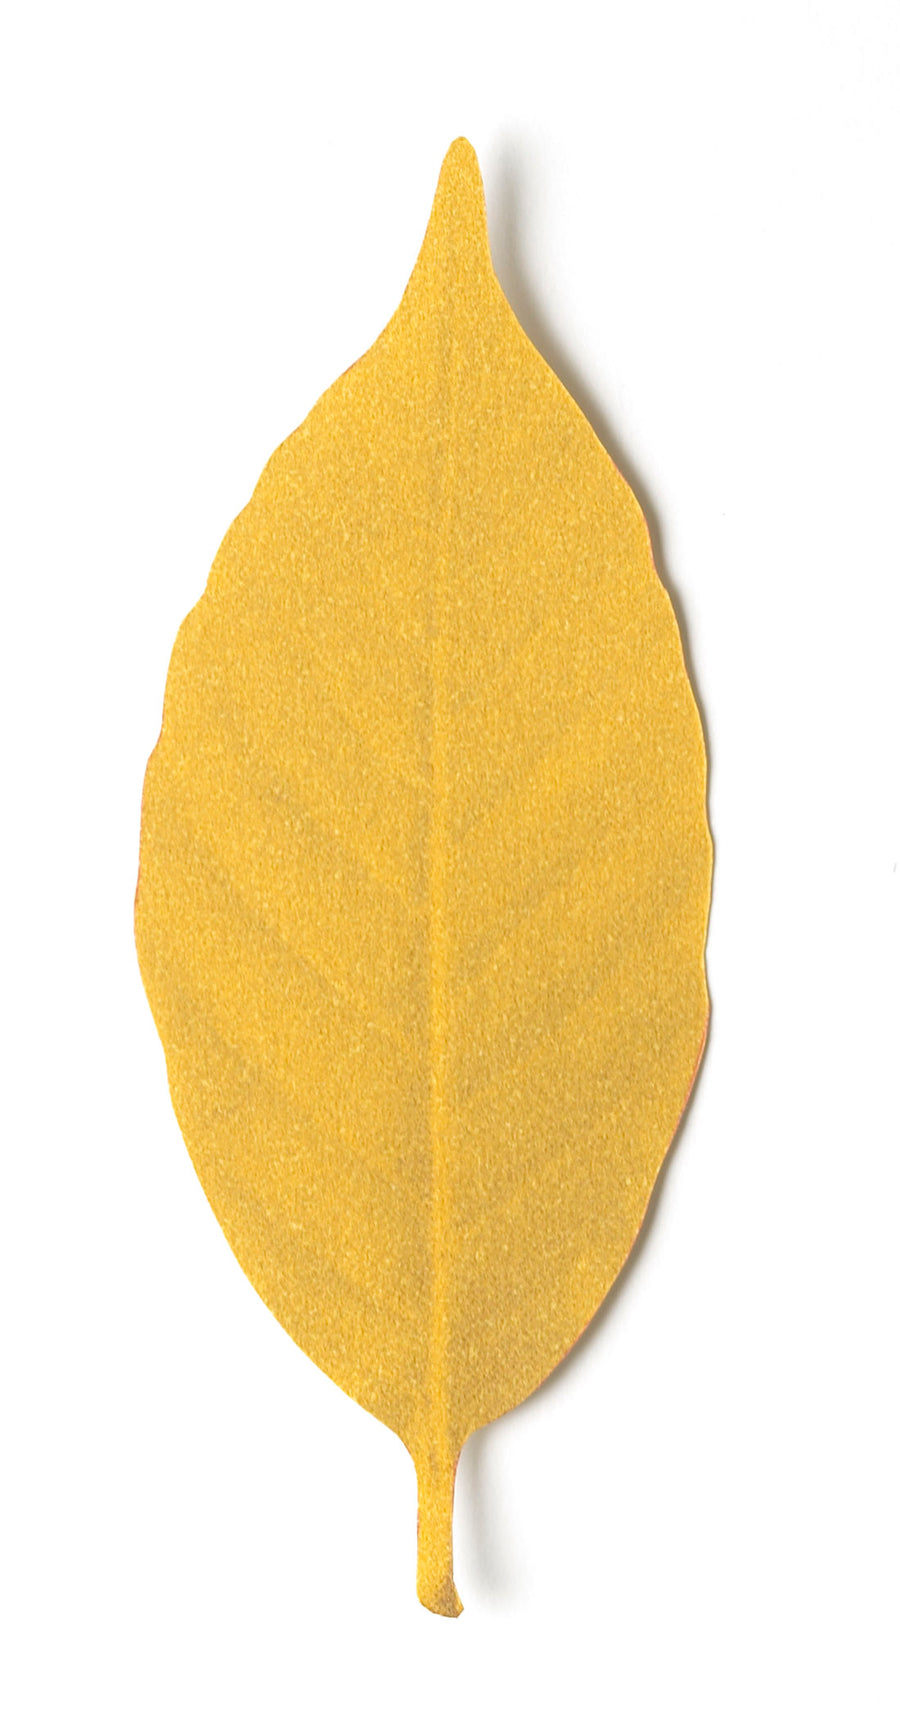 Leaf thermometer